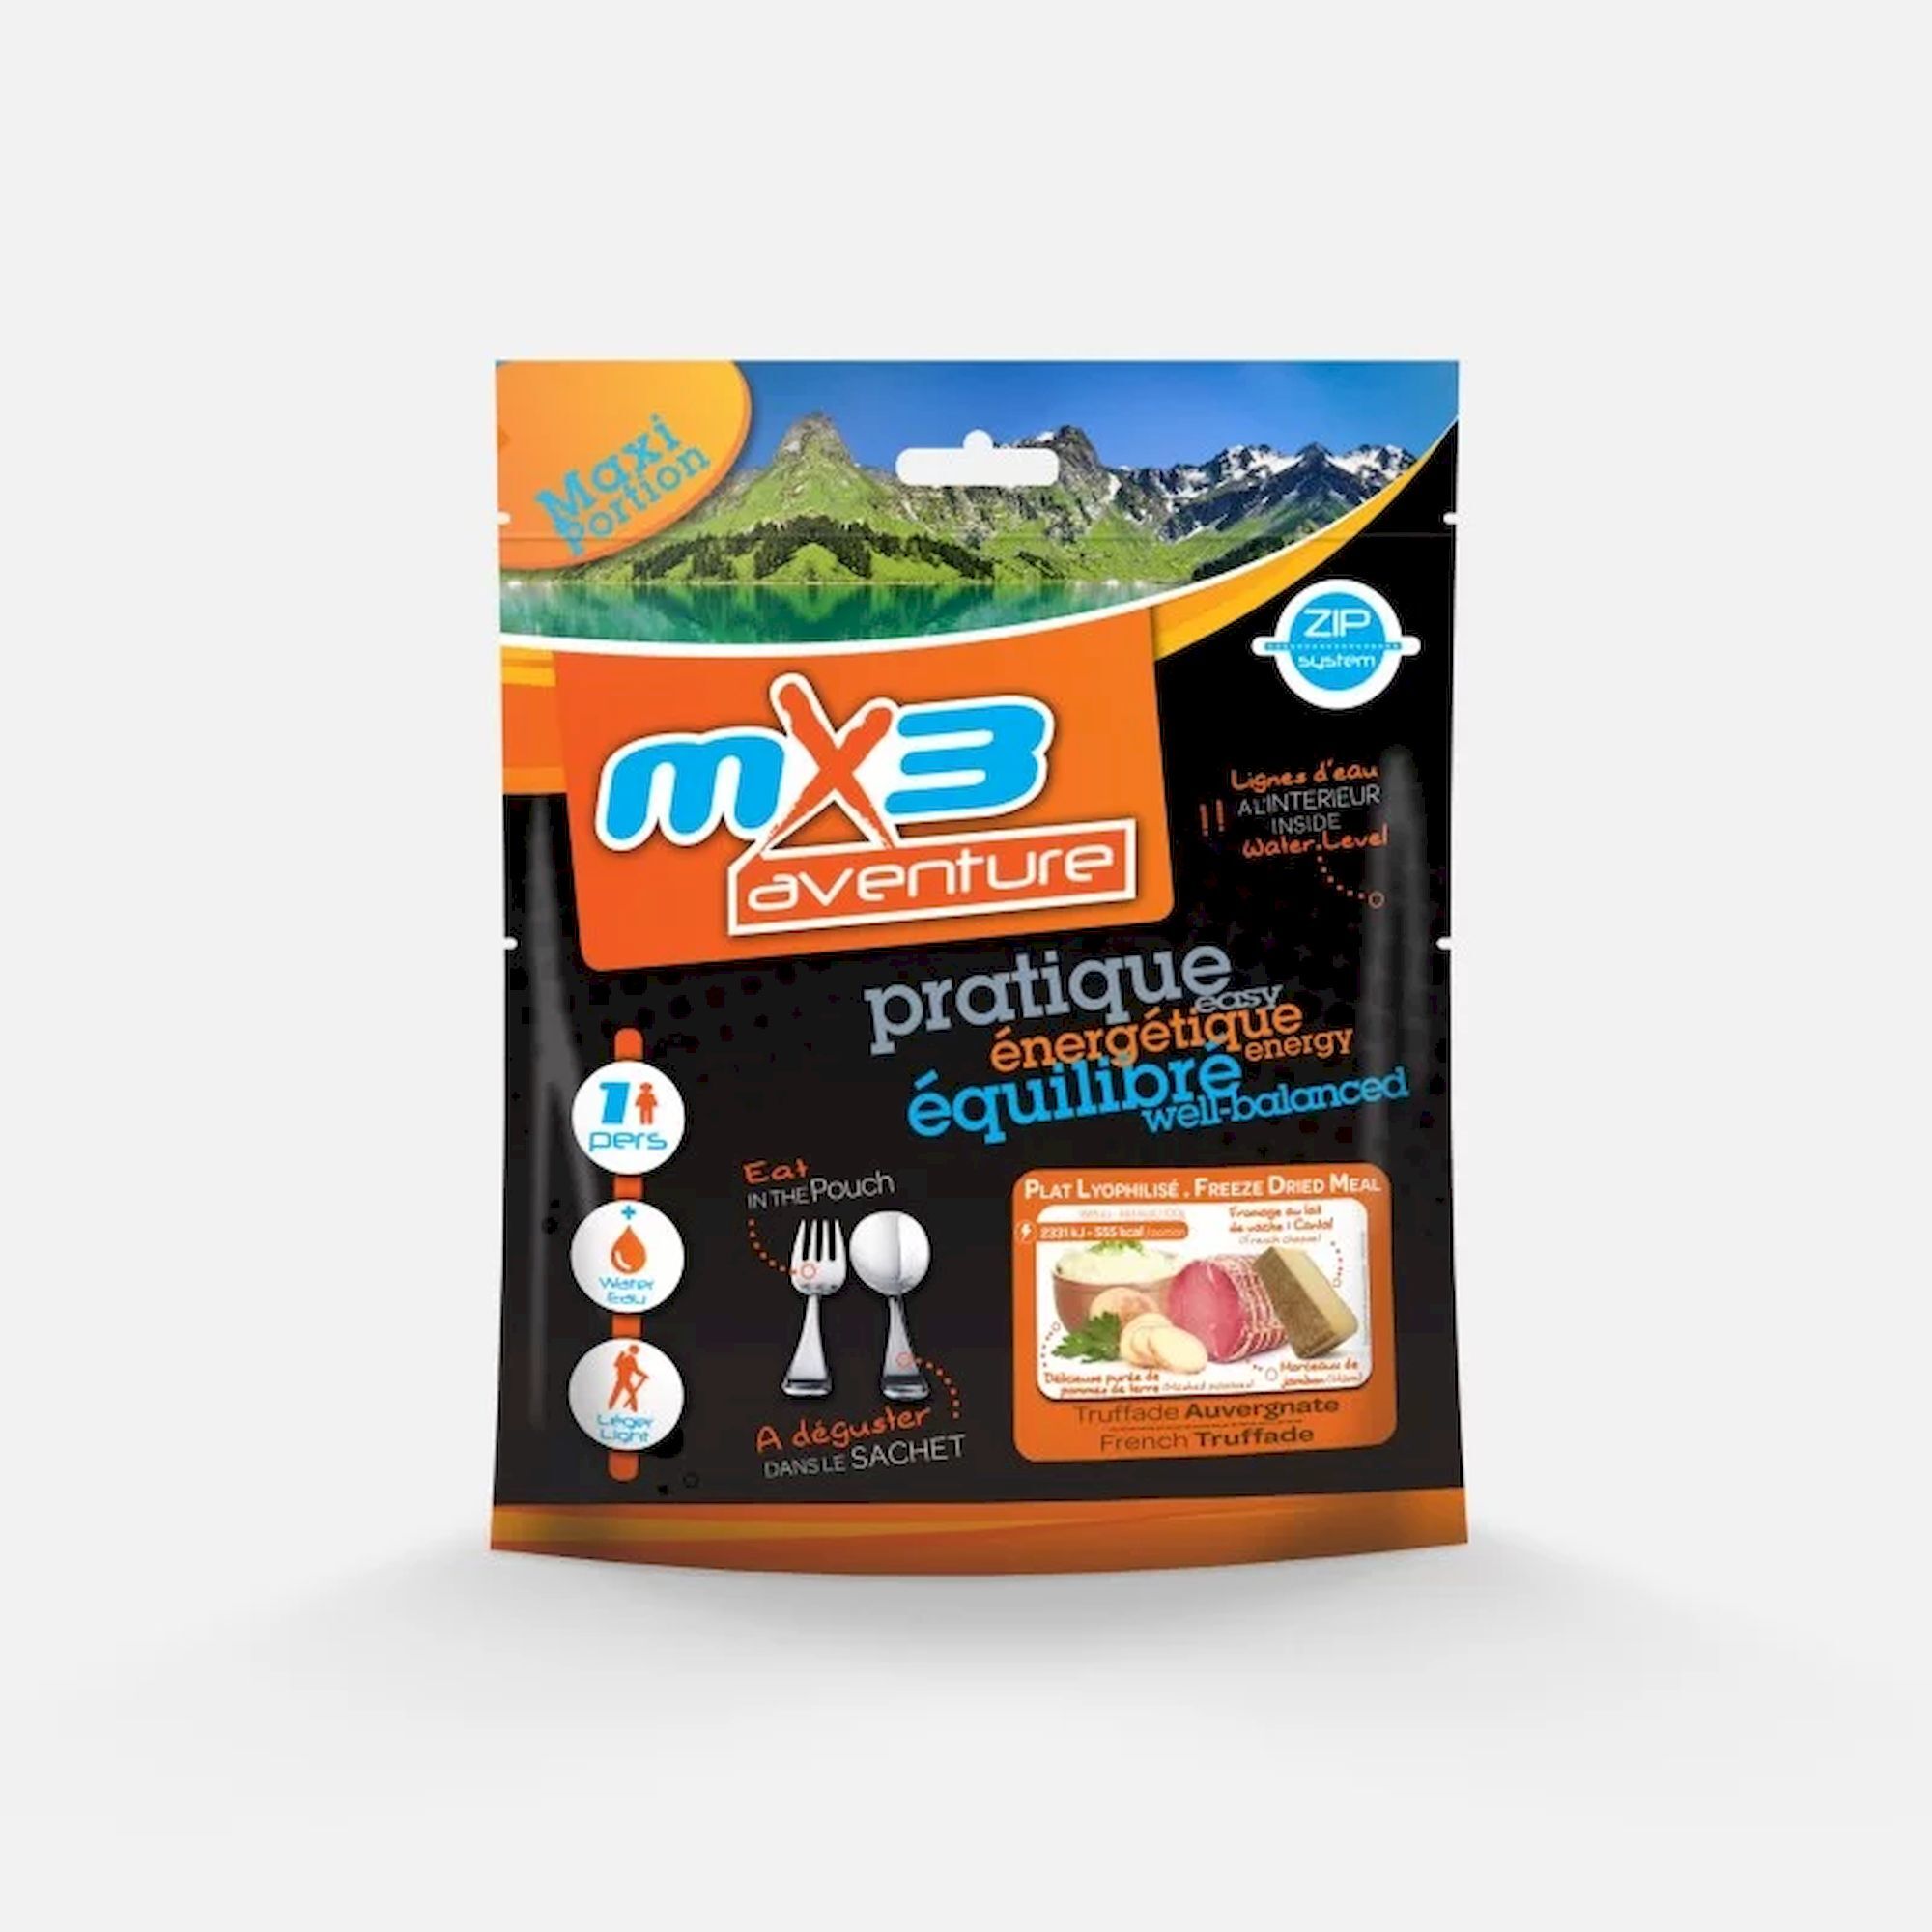 Mx3 Nutrition French Truffade (Potatoes and Cantal cheese) - Hlavní jídlo | Hardloop